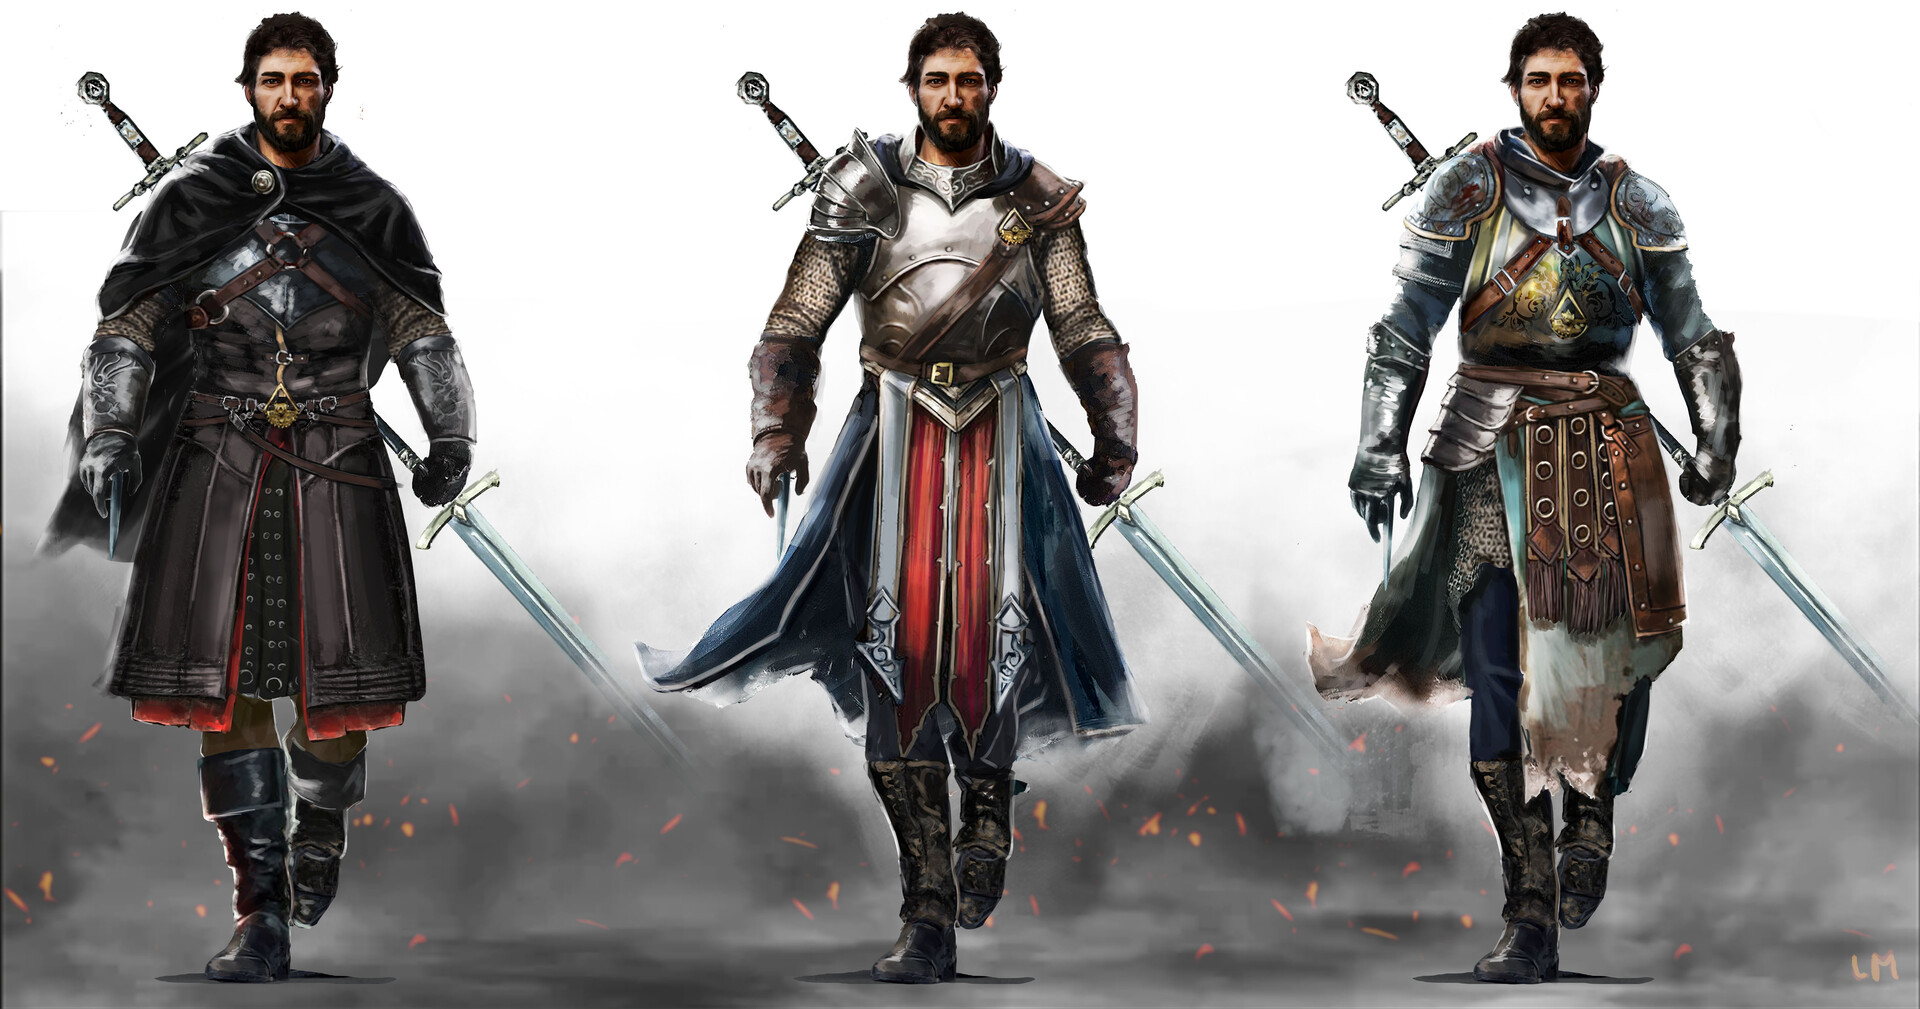 Mel Any - Medieval Knight Concept - Assassin's creed fan art style